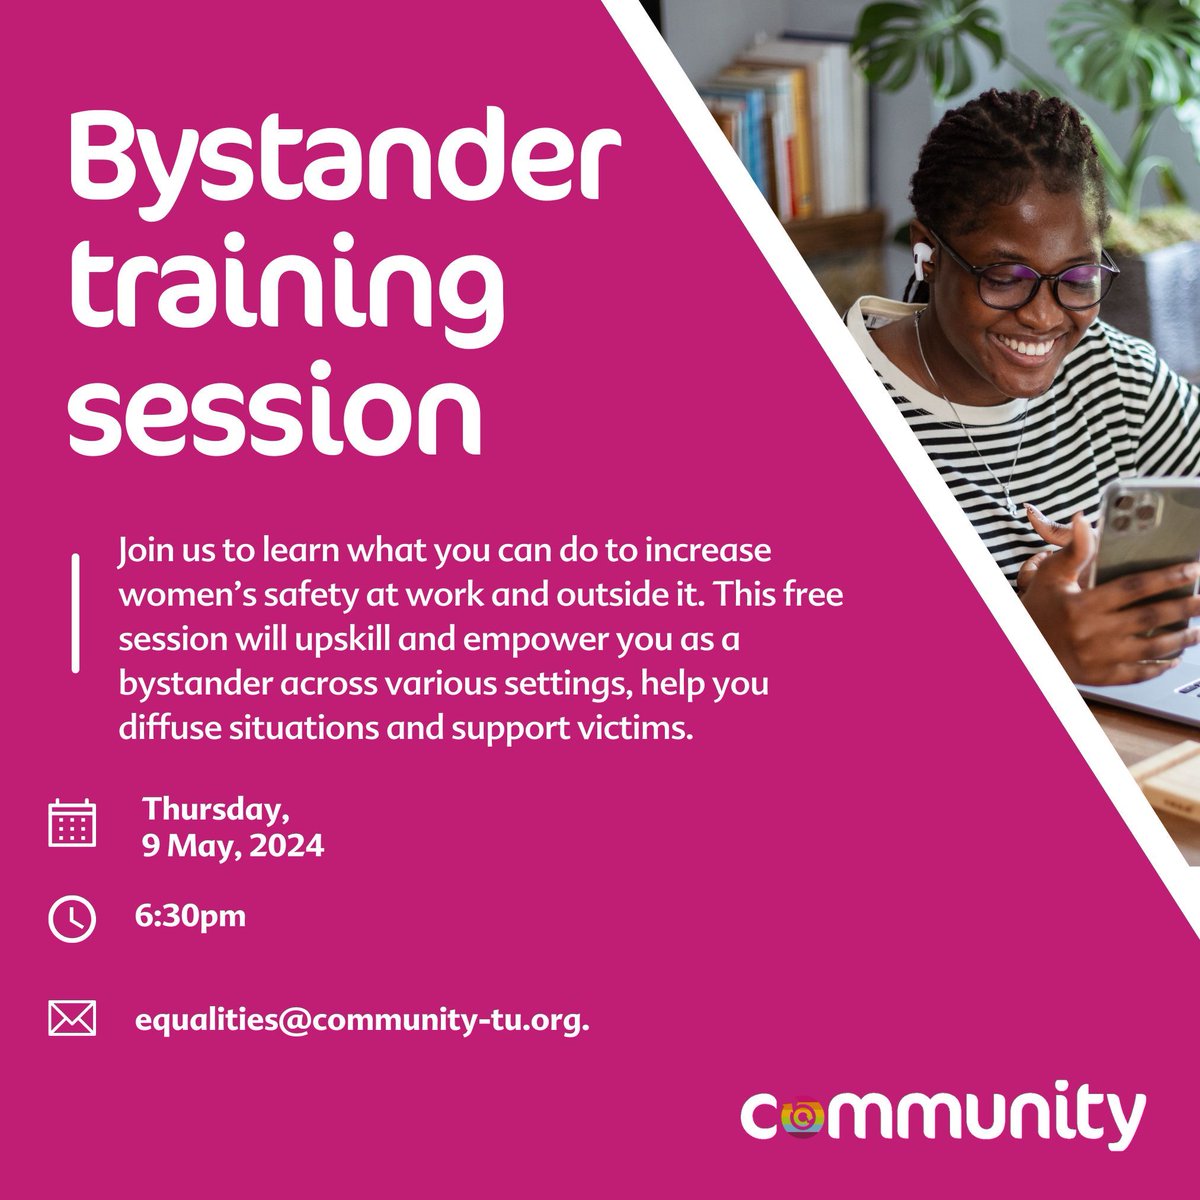 In partnership with @live_life_safe, we are running an exclusive training session, which will help you understand how to stand up against harassment in public and in your workplace. If you're interested in joining next month's session, register below. ⬇️ buff.ly/4ctfs0X